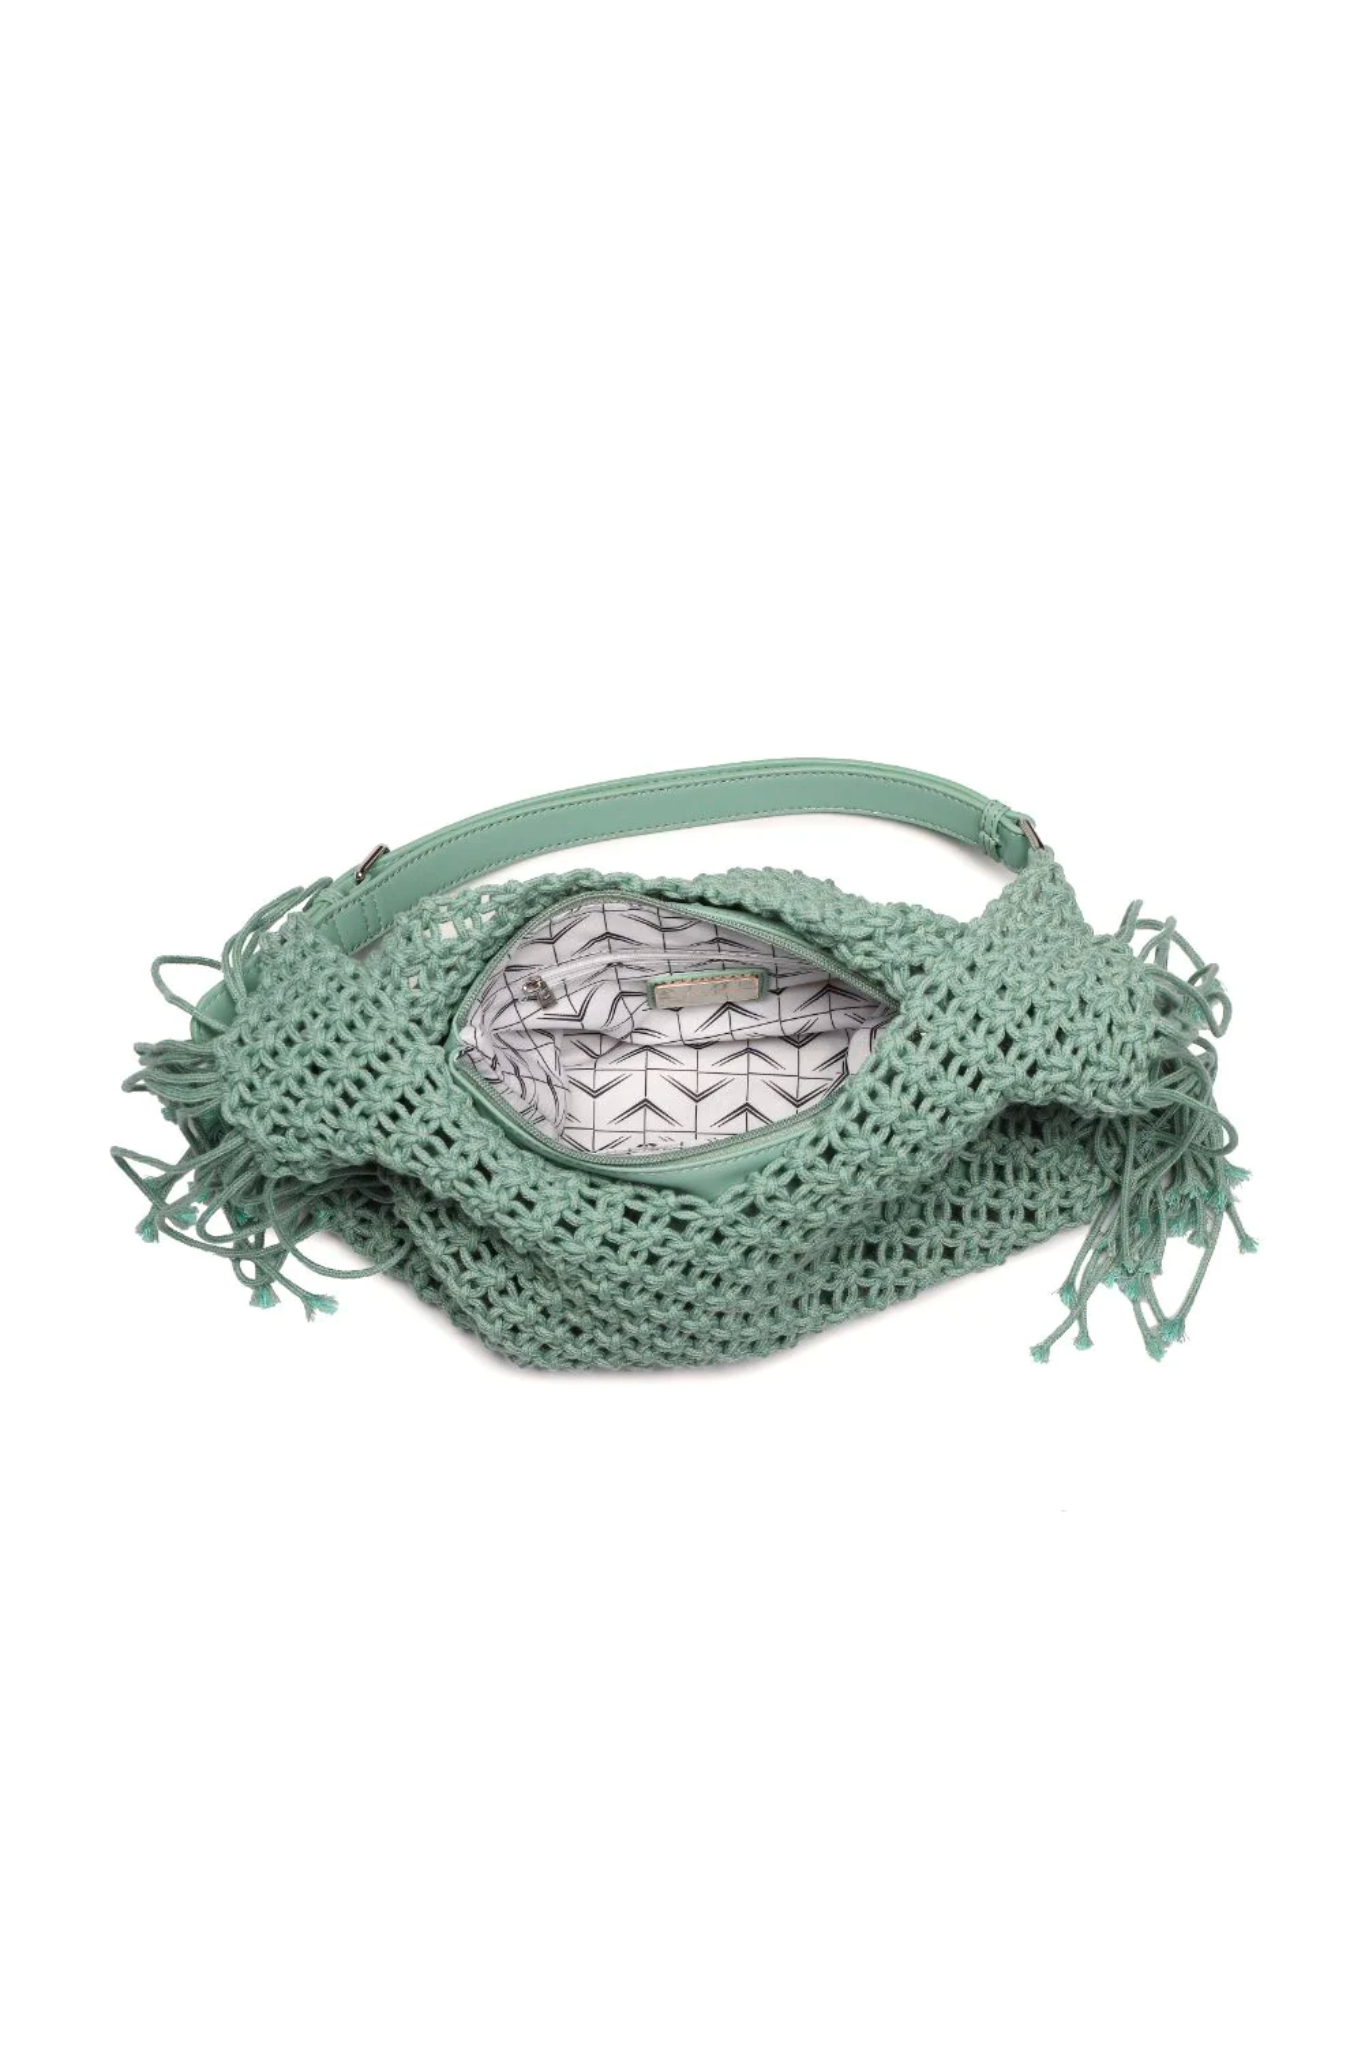 View 4 of Ariel Crochet Hobo Bag in Sage, a Bags from Larrea Cove. Detail: .